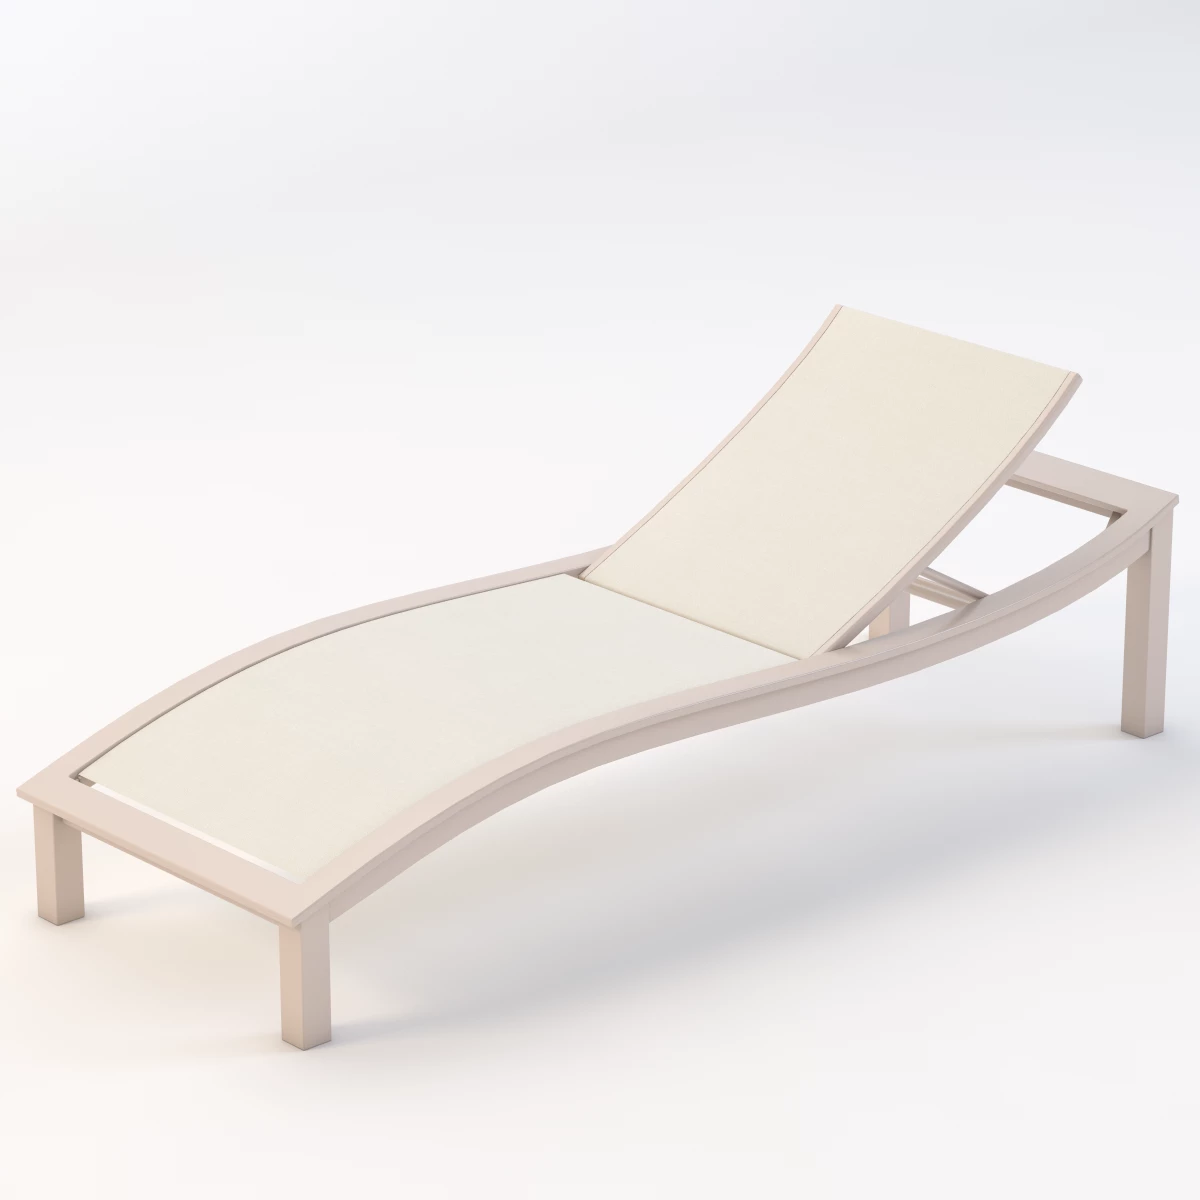 Bazza Sling Chaise Sunlounge by Telescope Casual Furniture 3D Model_01